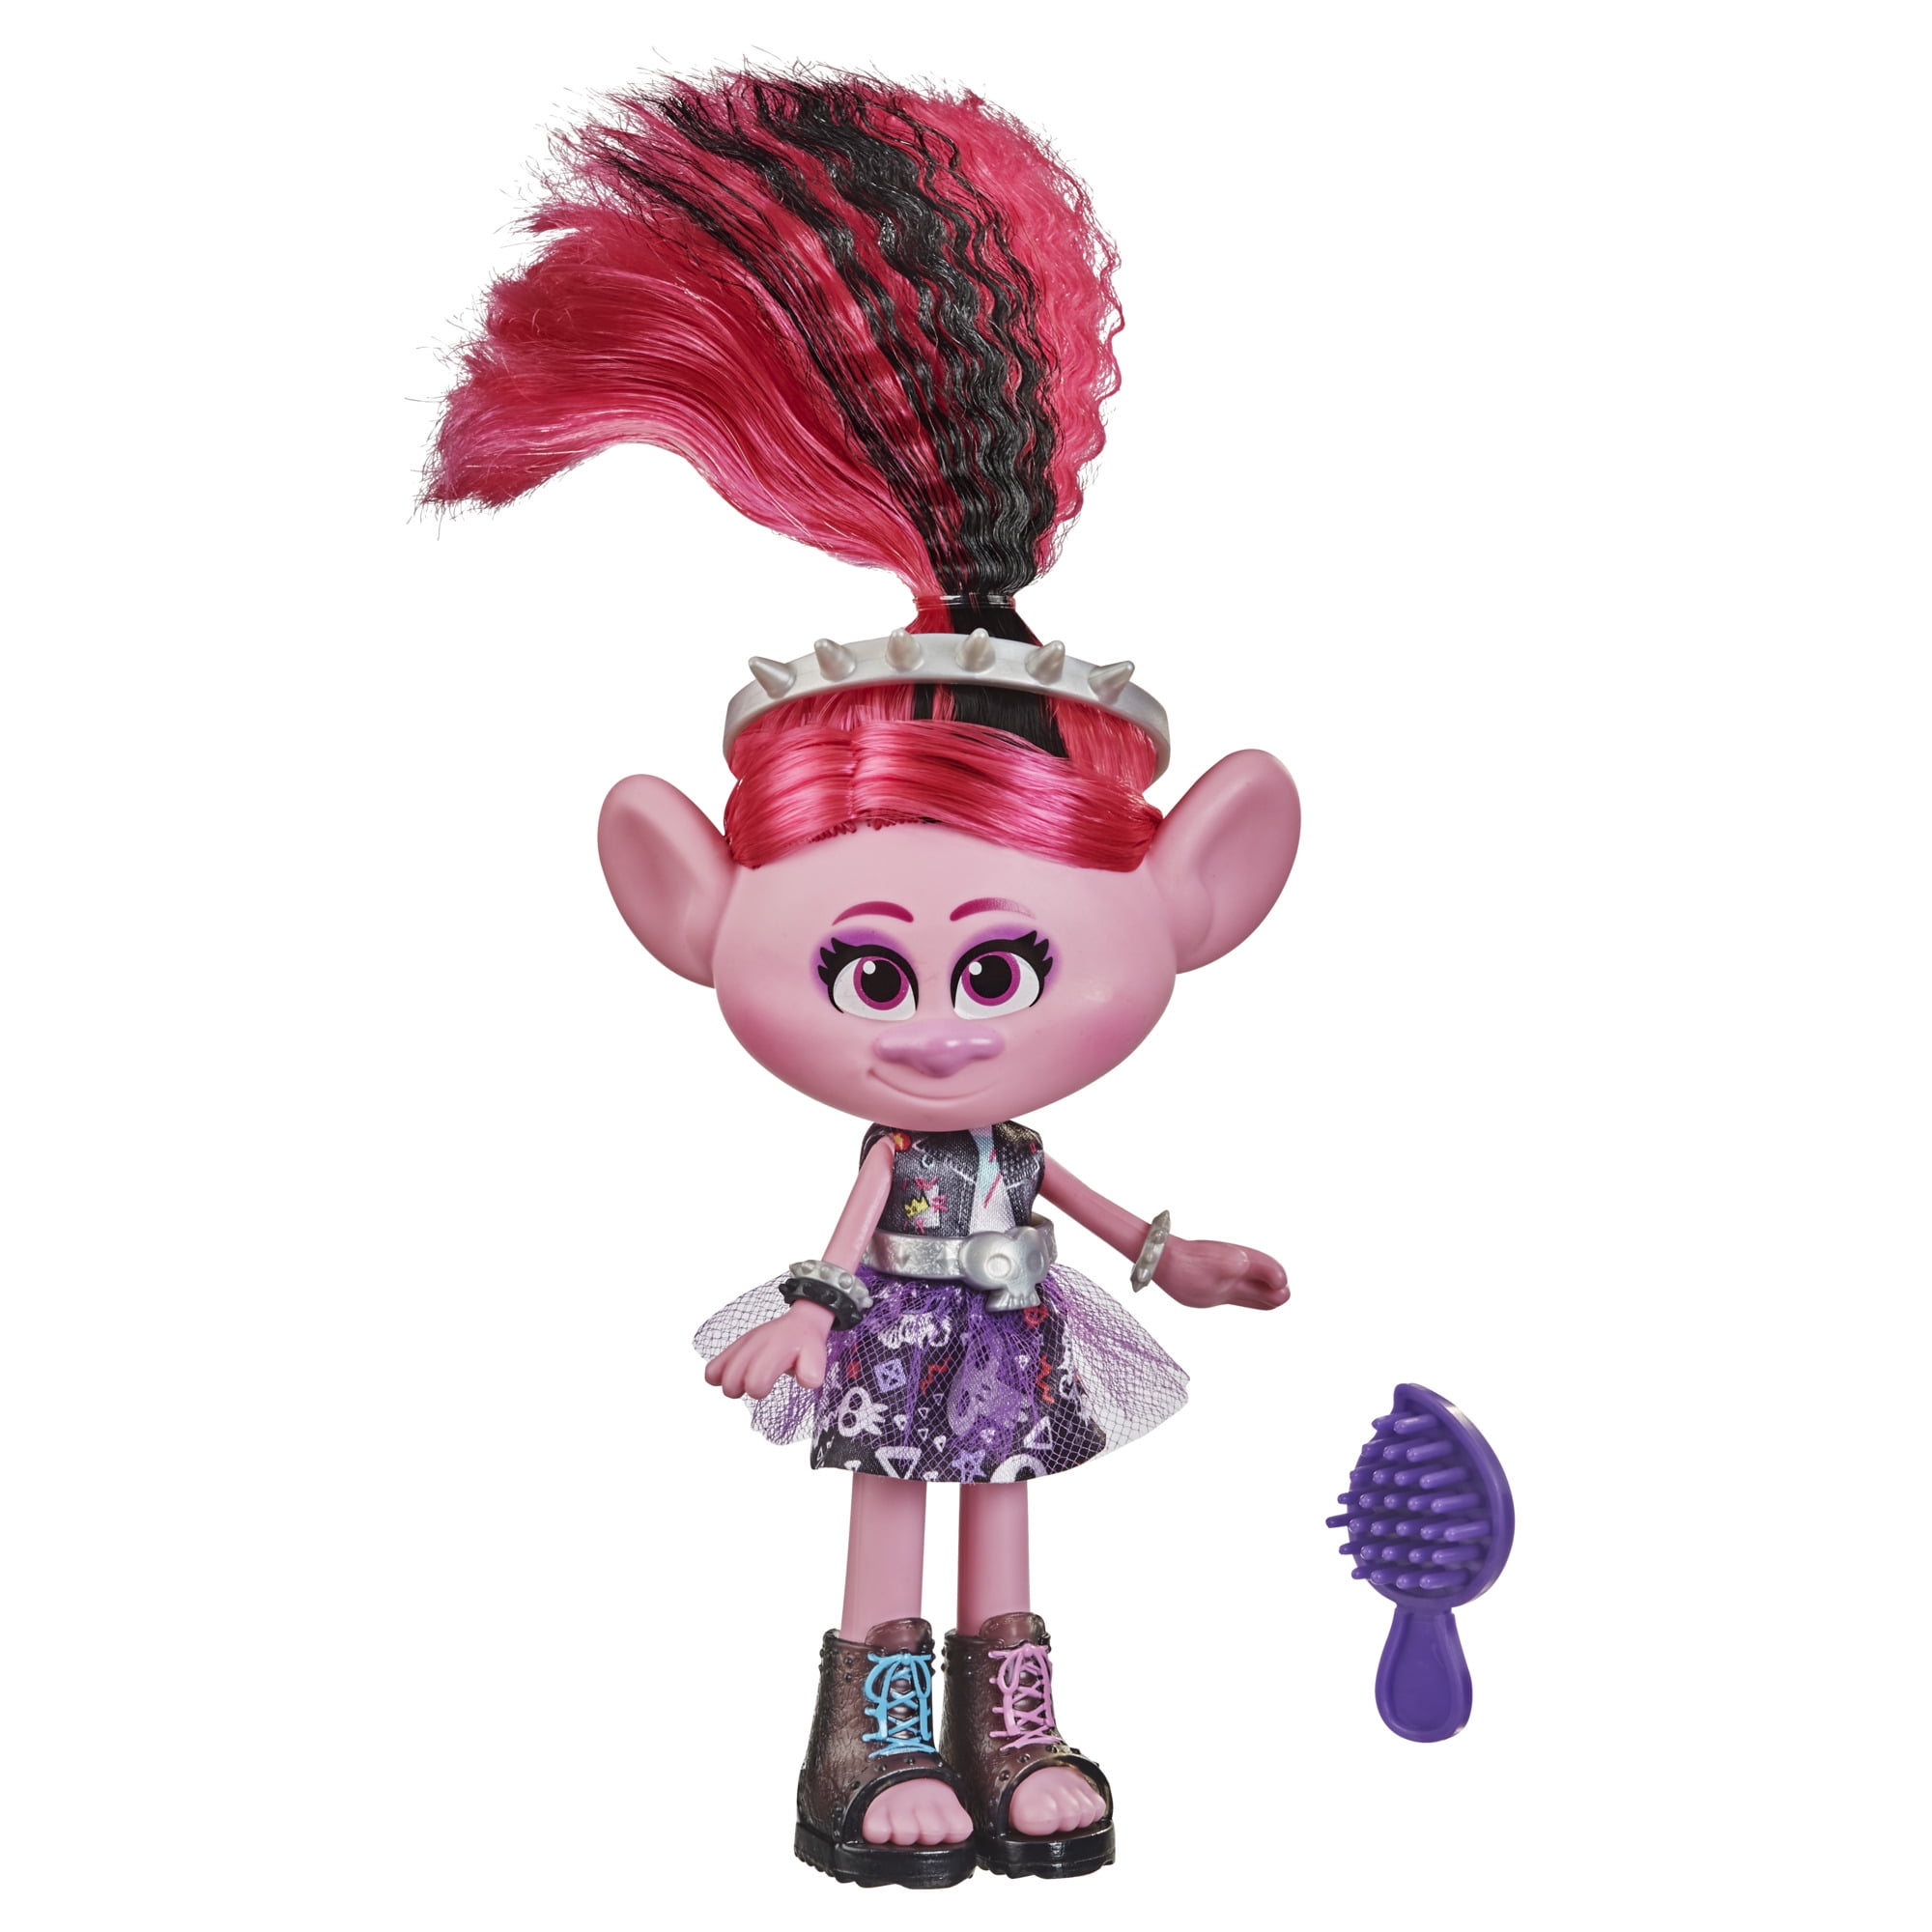 Details about   Trolls DreamWorks Glam Poppy Fashion Doll with Dress,Shoes & More 